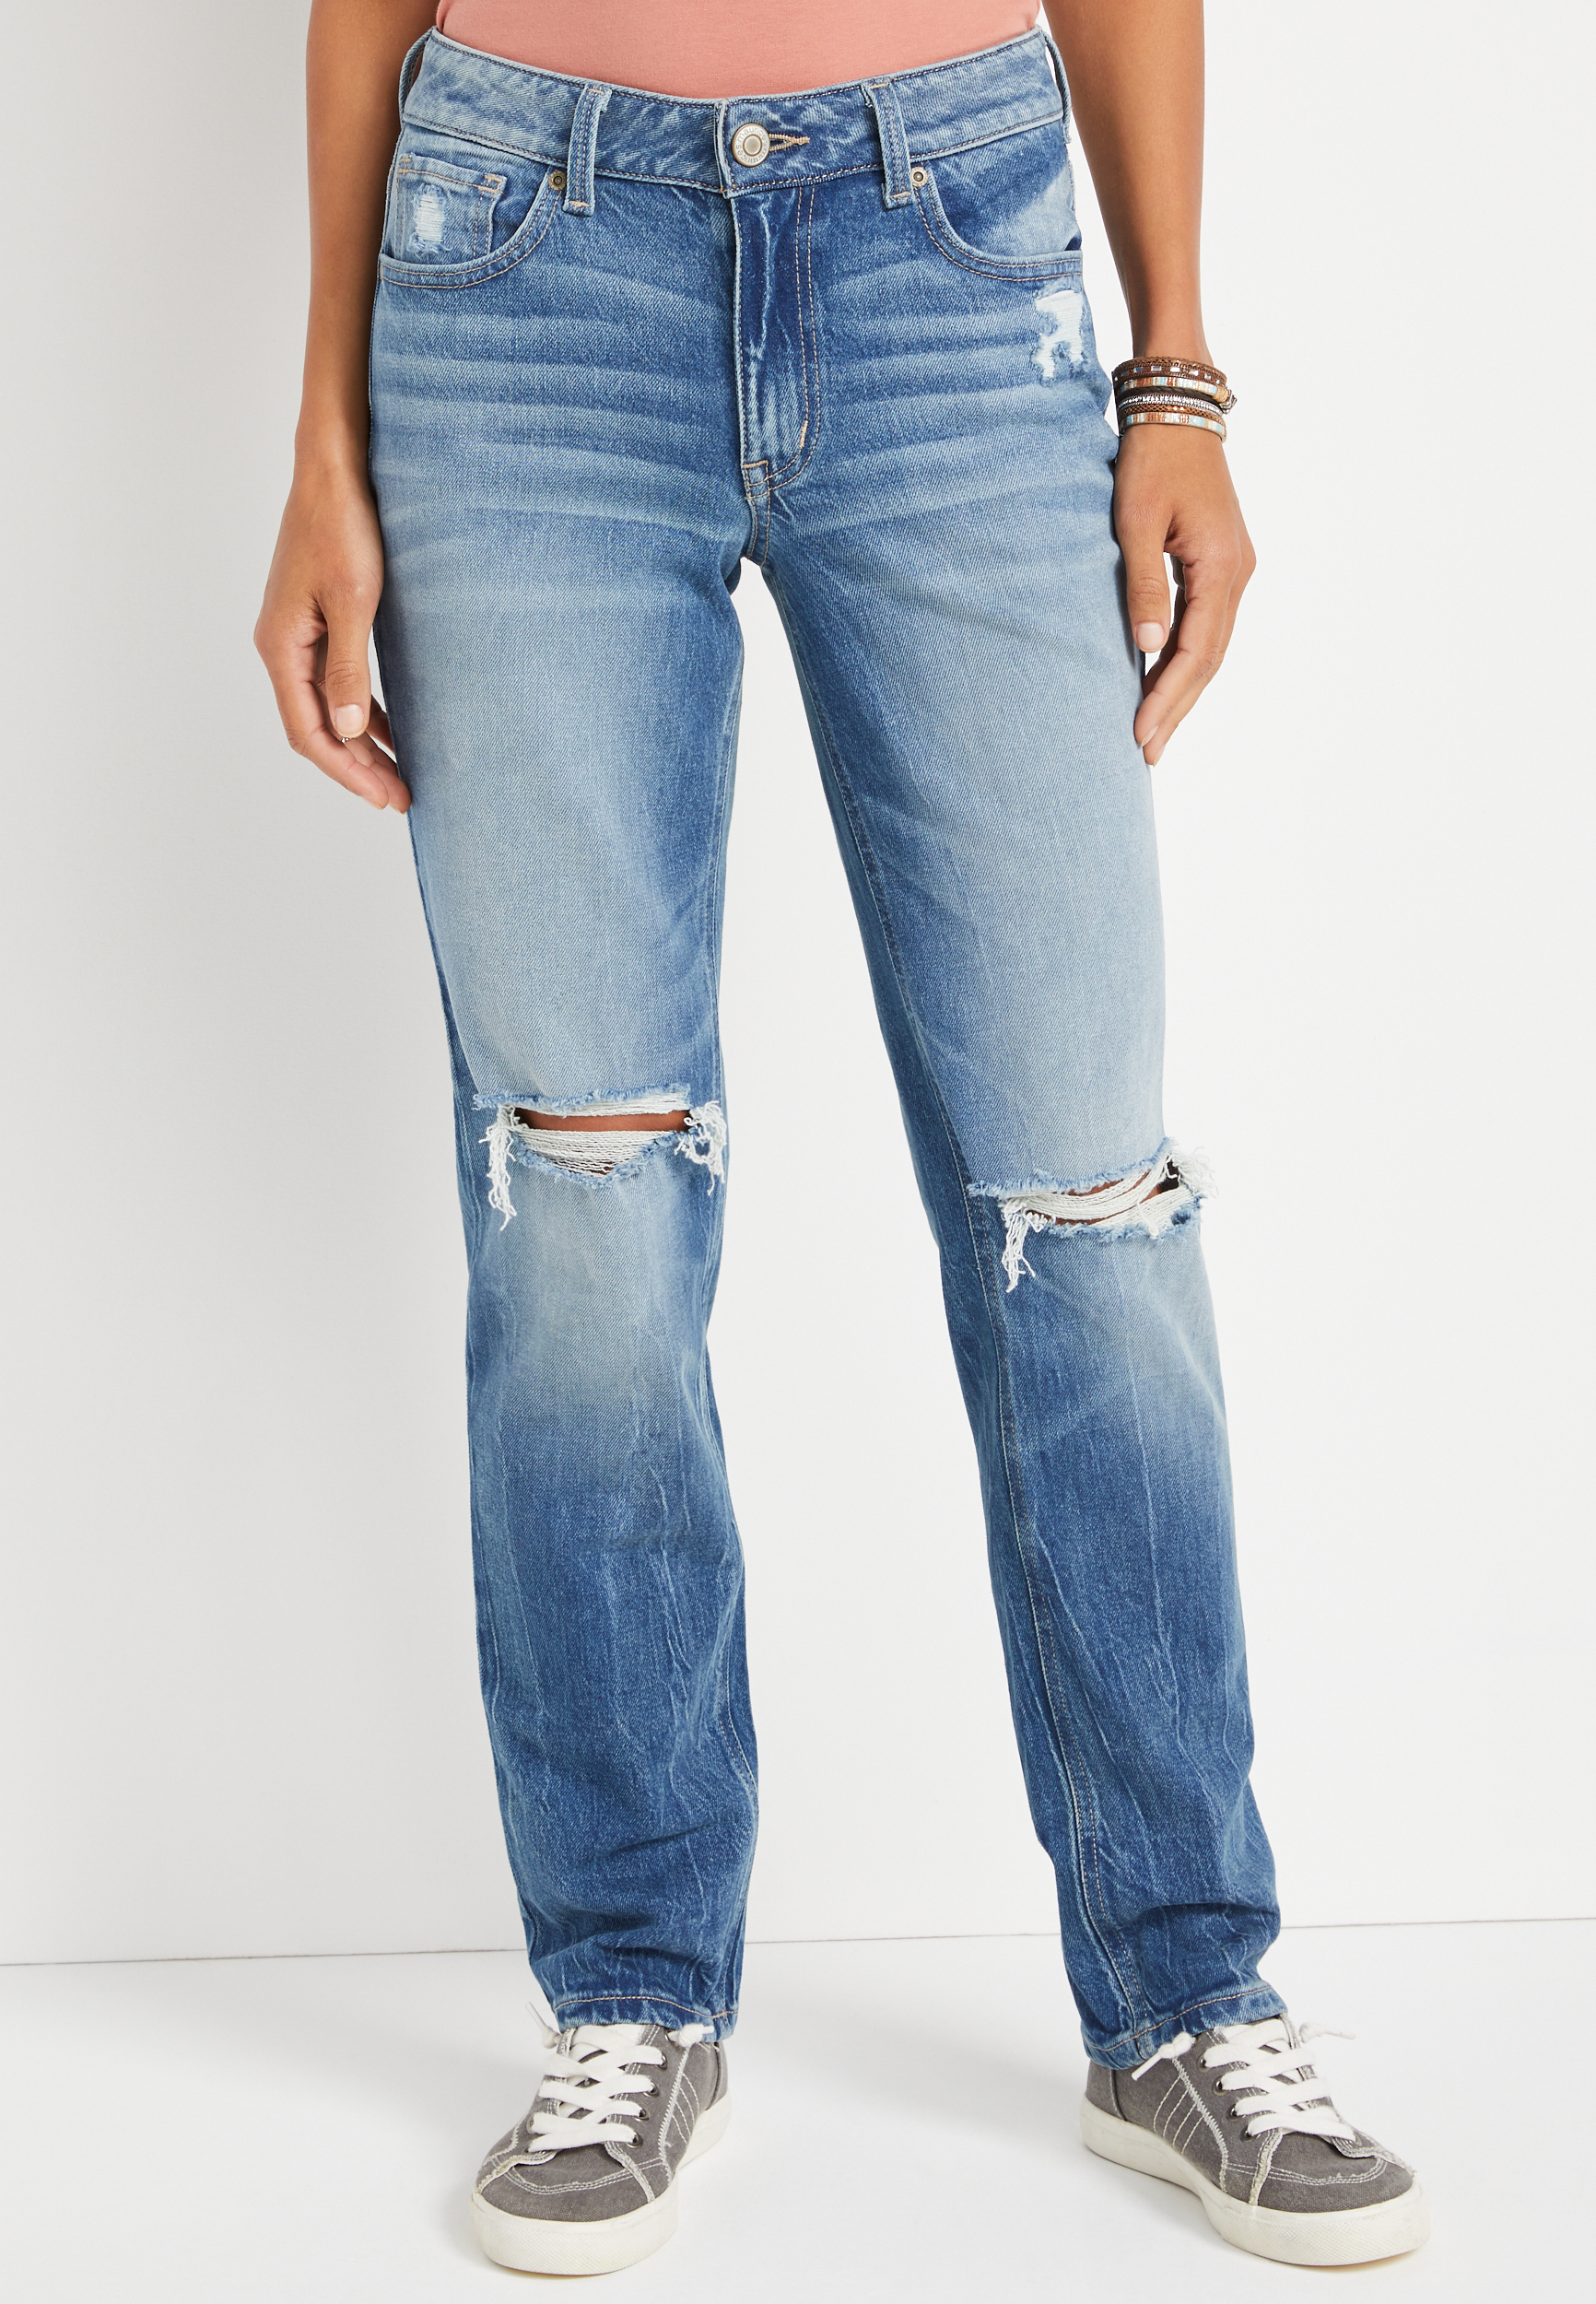 m jeans by mauricesâ¢ Vintage Straight High Rise Ripped Relaxed Jean | maurices